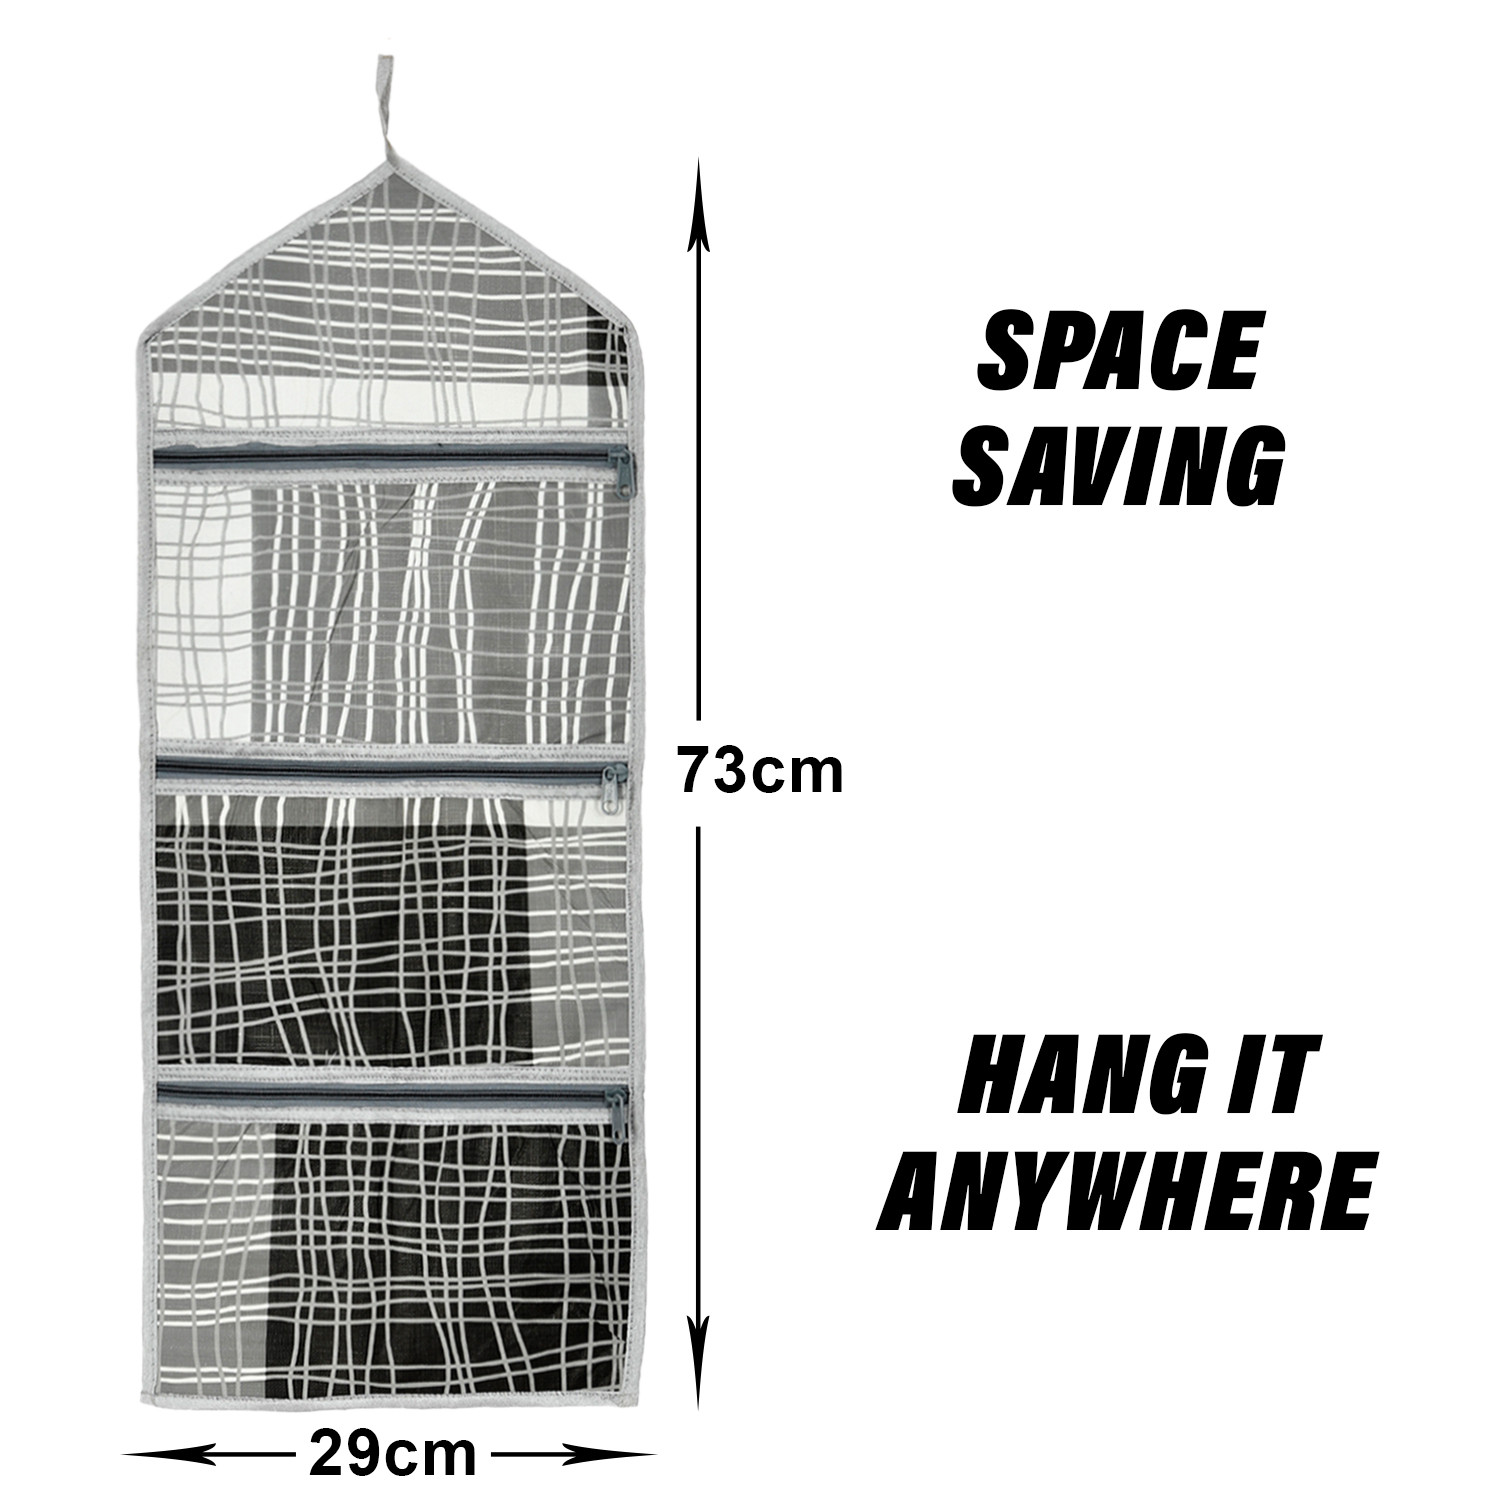 Kuber Industries Paper Holder | Foldable Hanging Organizer | PVC Lining Pattern Document Holder | 3 Pocket Wall Hanging Holder with Zipper | Gray & Black